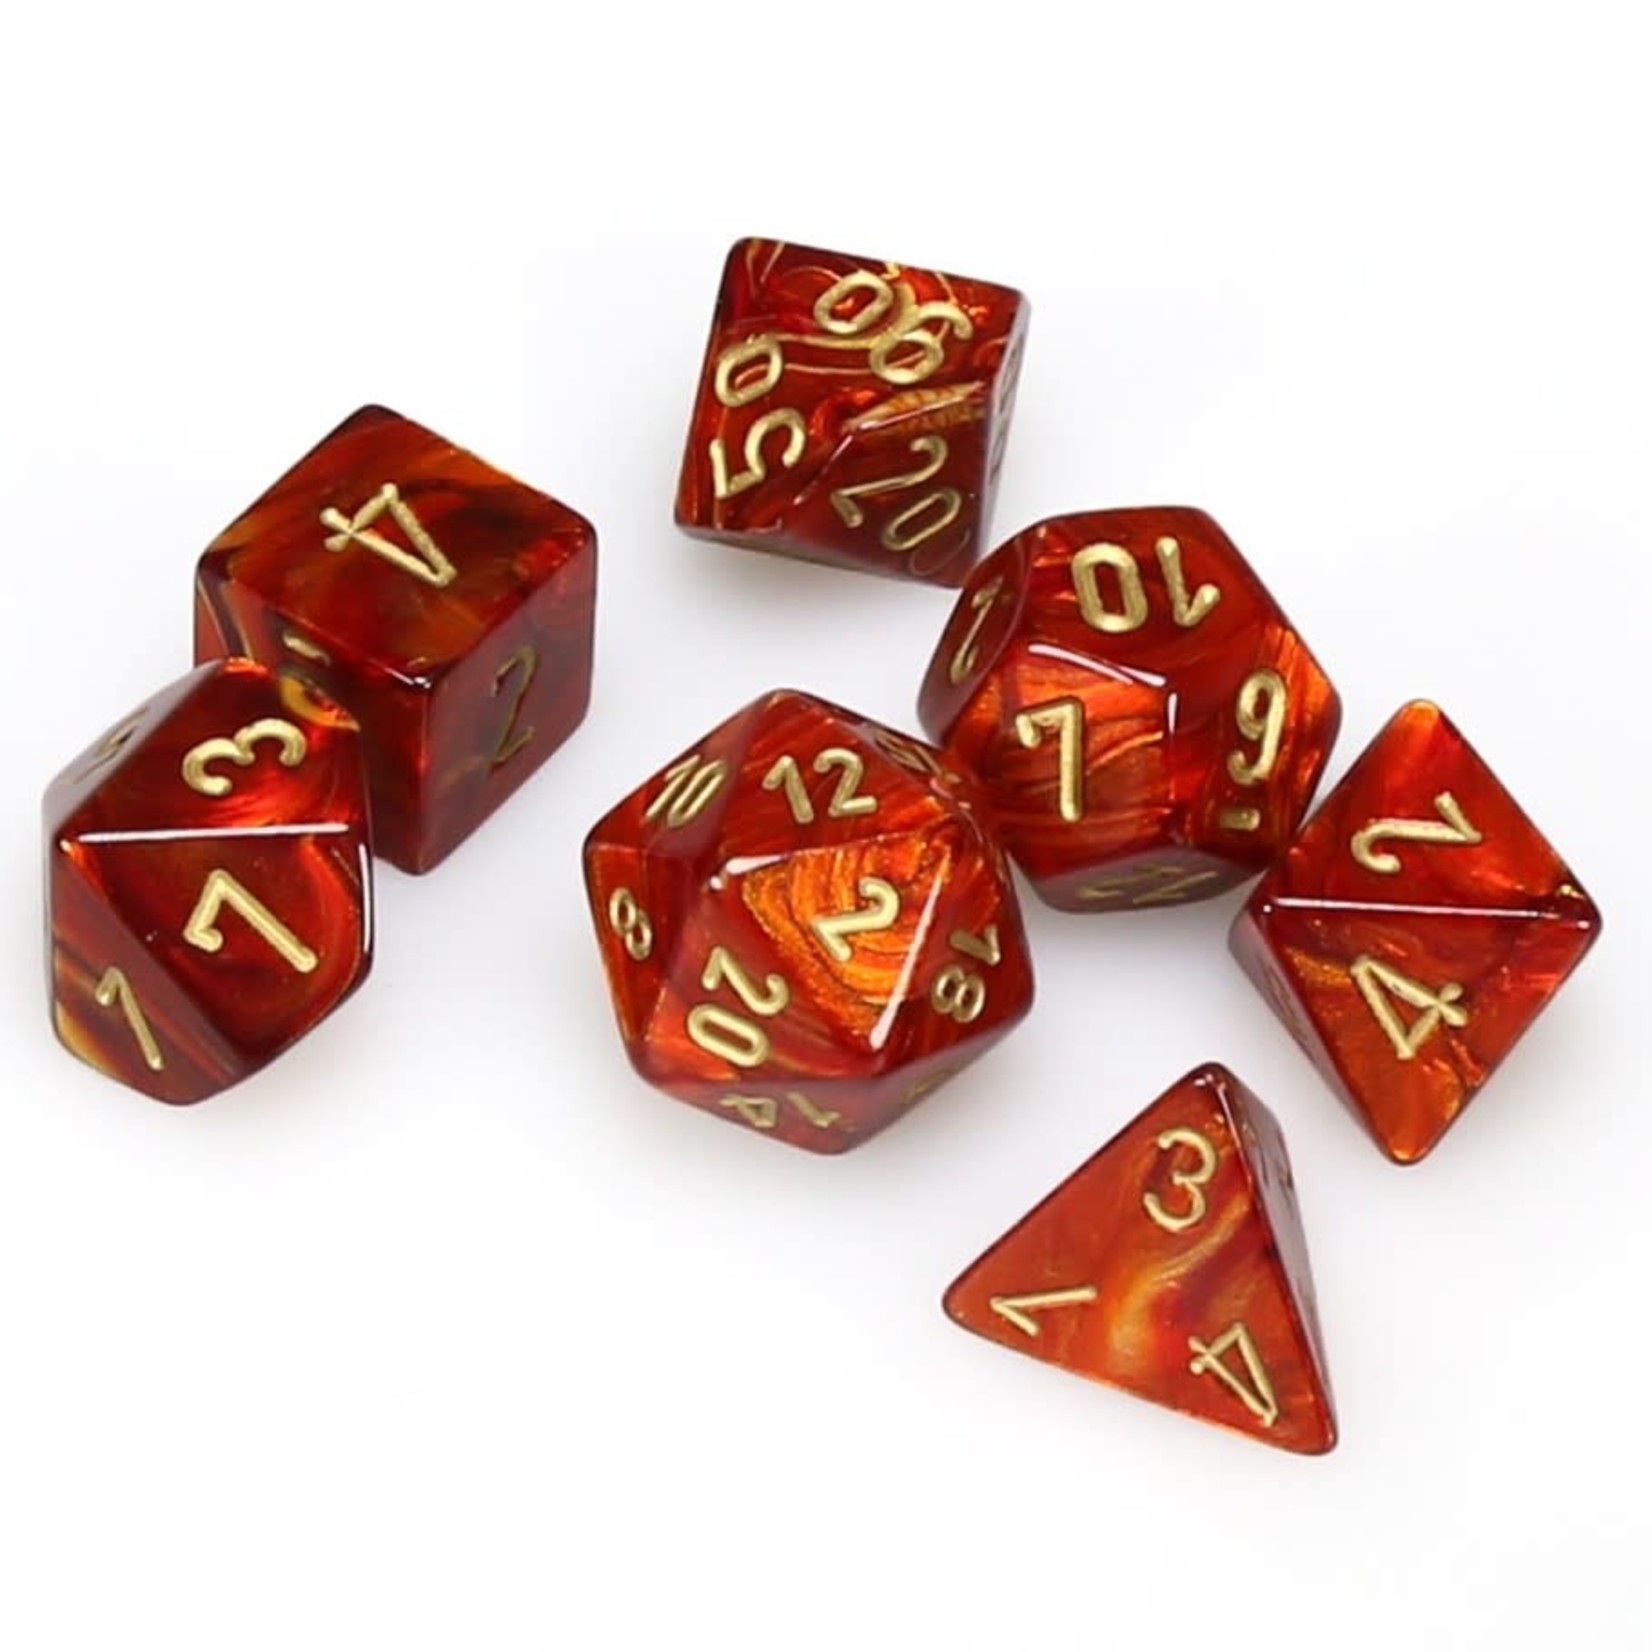 Chessex Chessex Scarab Scarlet with Gold Polyhedral 7 die set